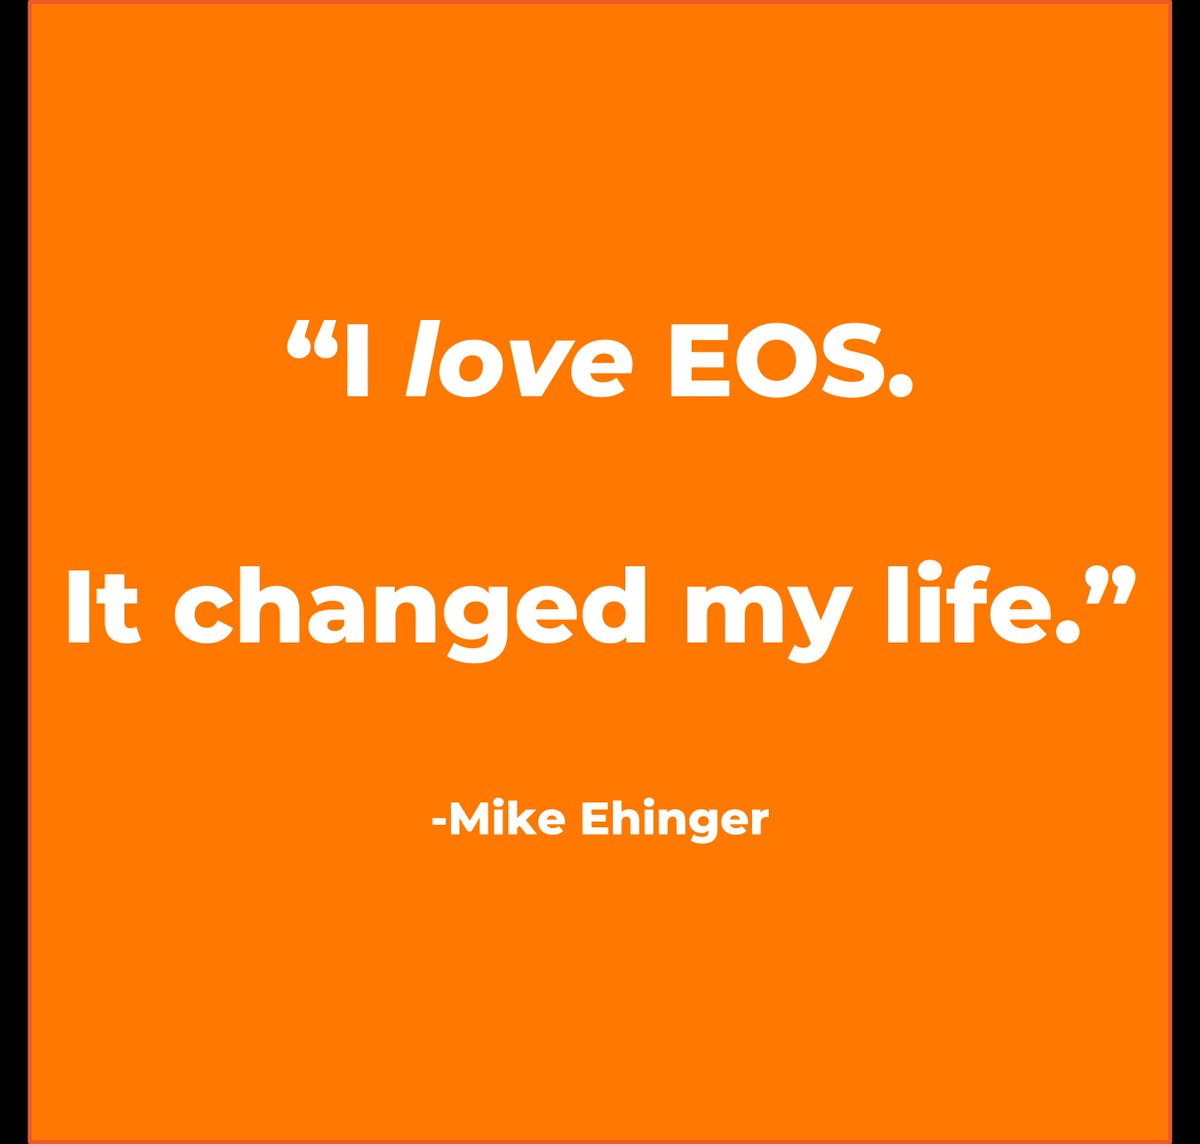 One of the joys of bringing EOS to life is running into people **frequently** say things like this. Mike, it was great chatting with you today, loved your insights and discovering unexpected (fashion) connections! #fractional #fractionalintegrator #TrueFI #eos #eoslife